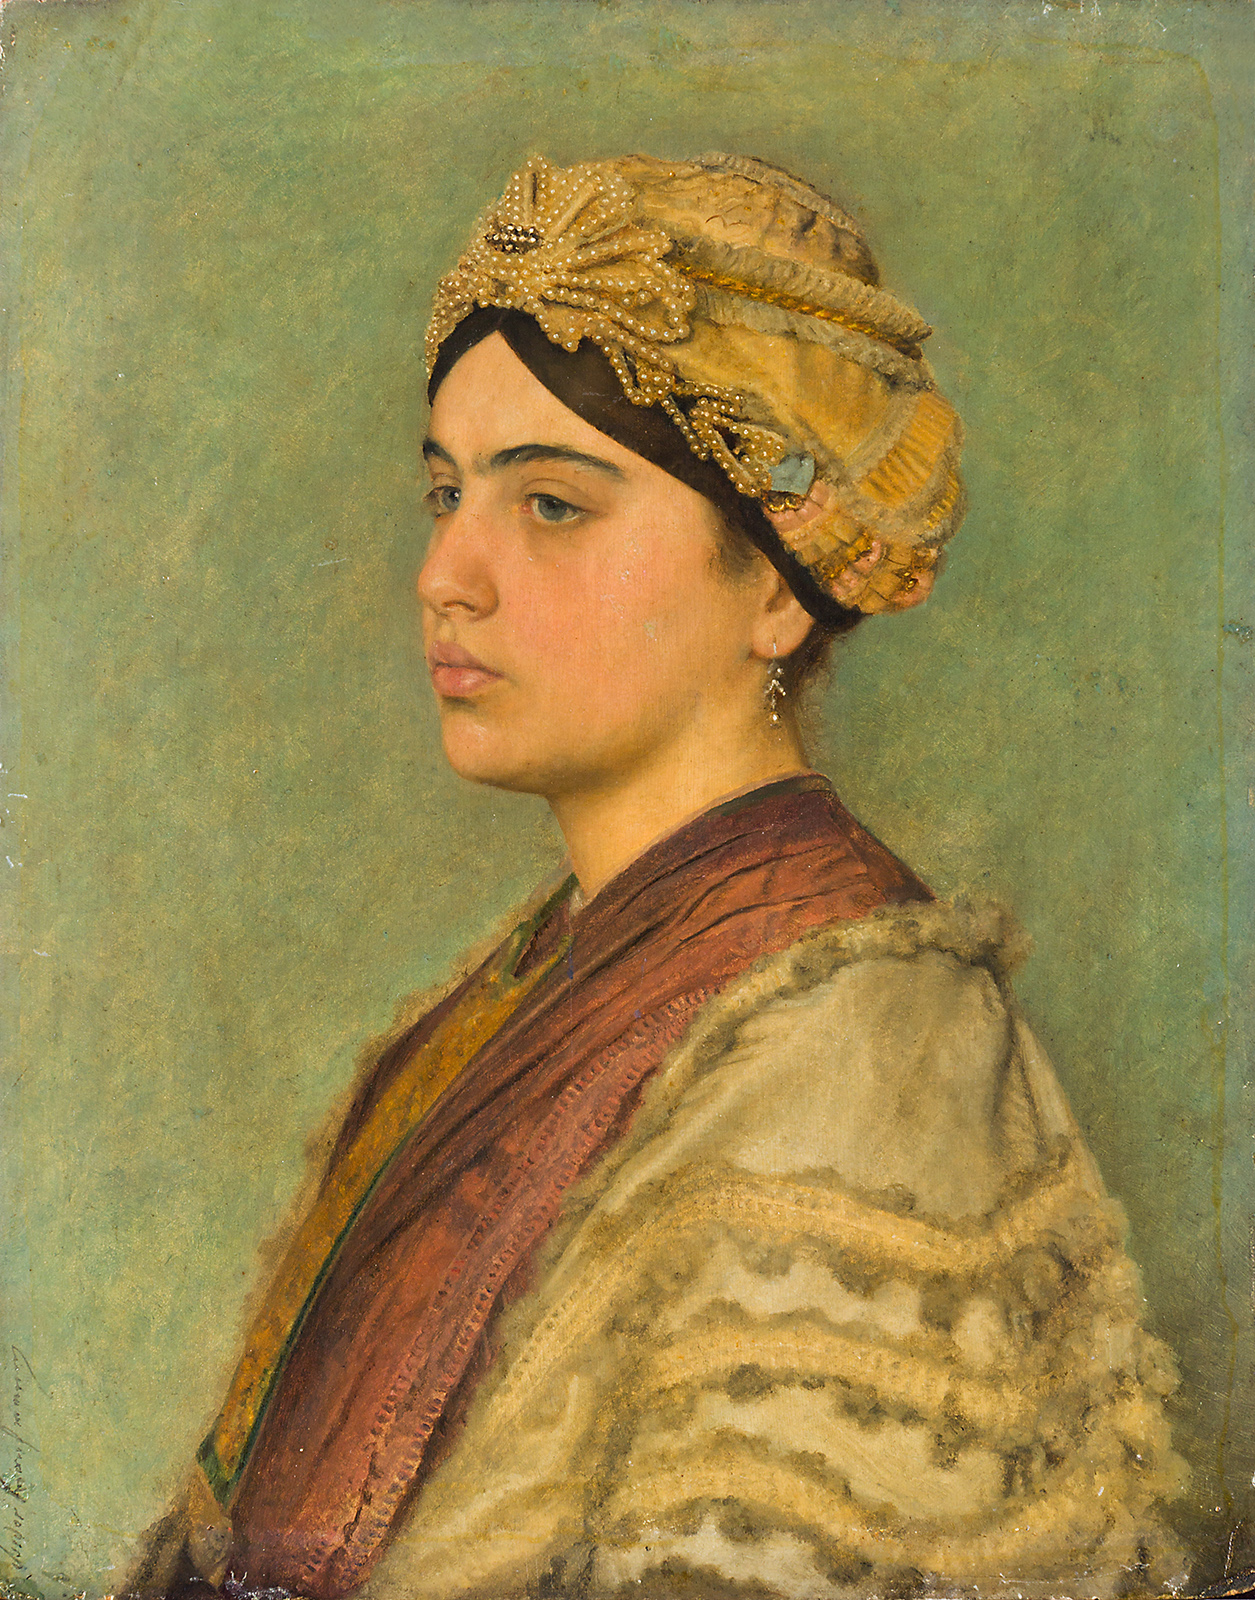 Isidor Kaufmann. <p>Young Jewish Bride. <p>Oil on panel. 31 x 25 inches. <p>Sold at auction 16th March, 2017. <p>Hammer-price: $230,000.